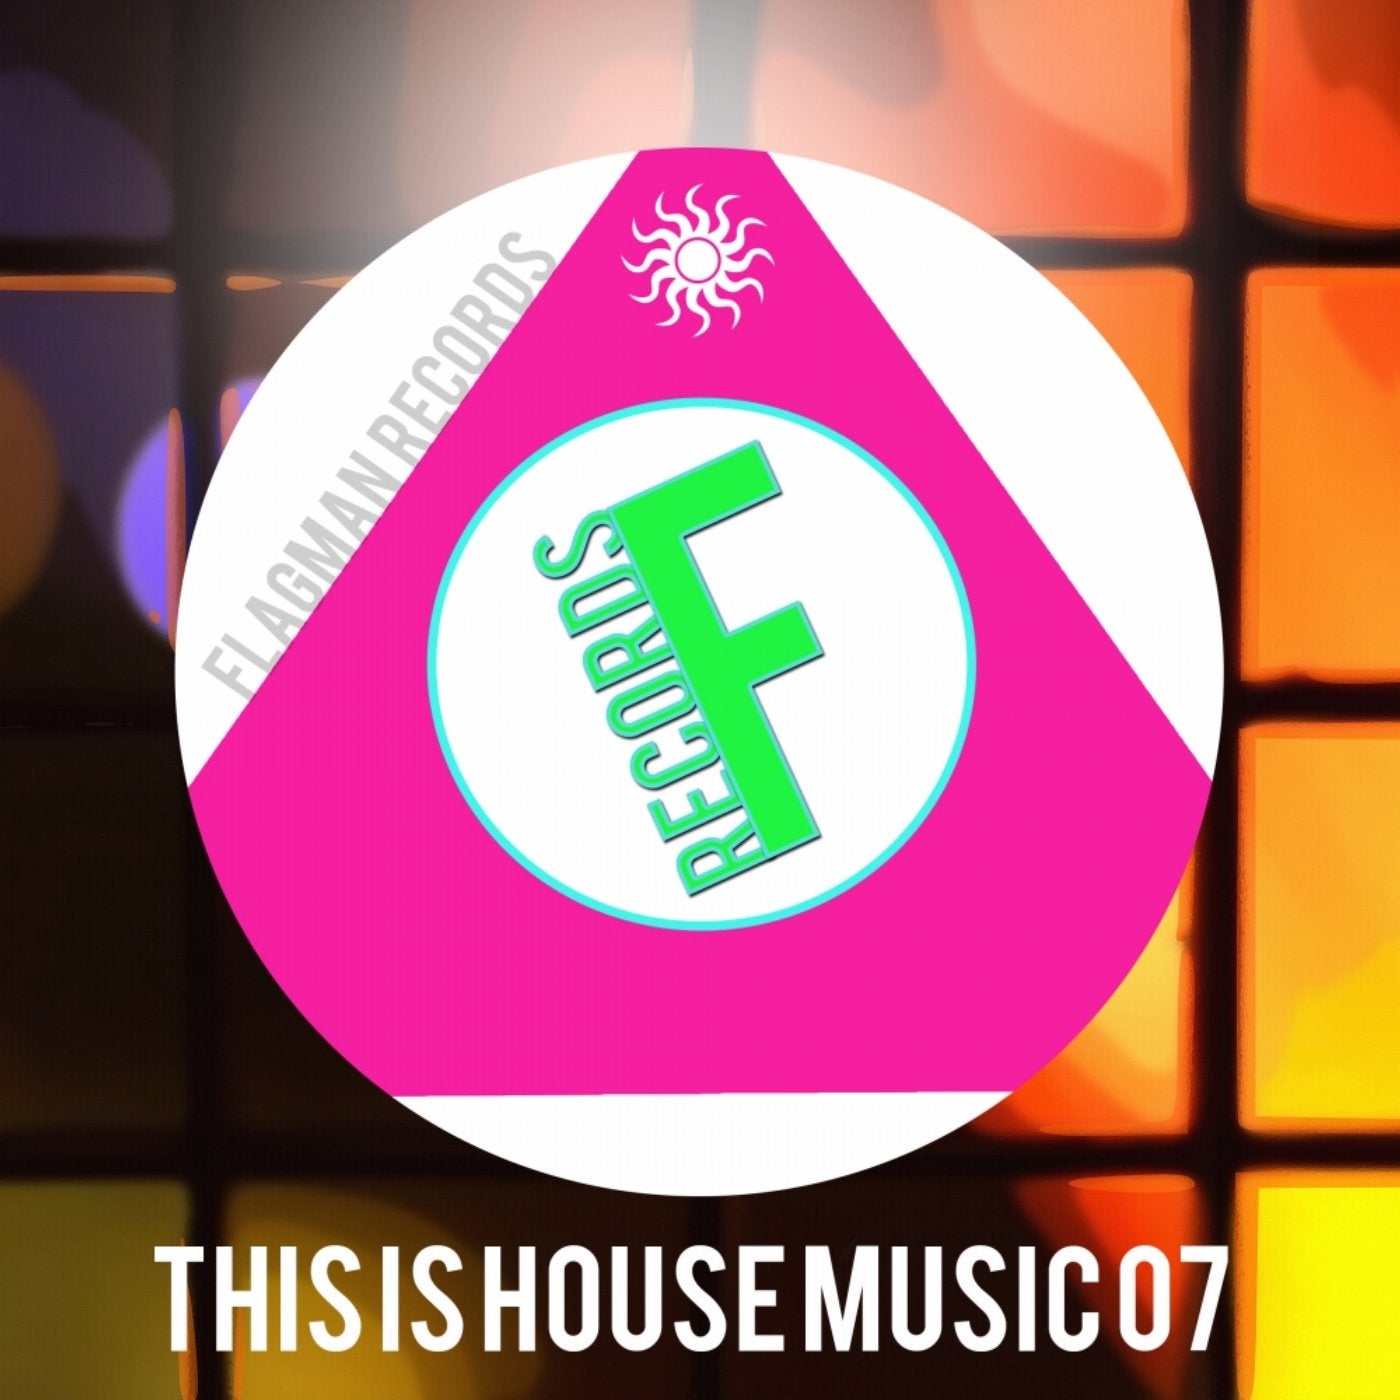 This Is House Music 07